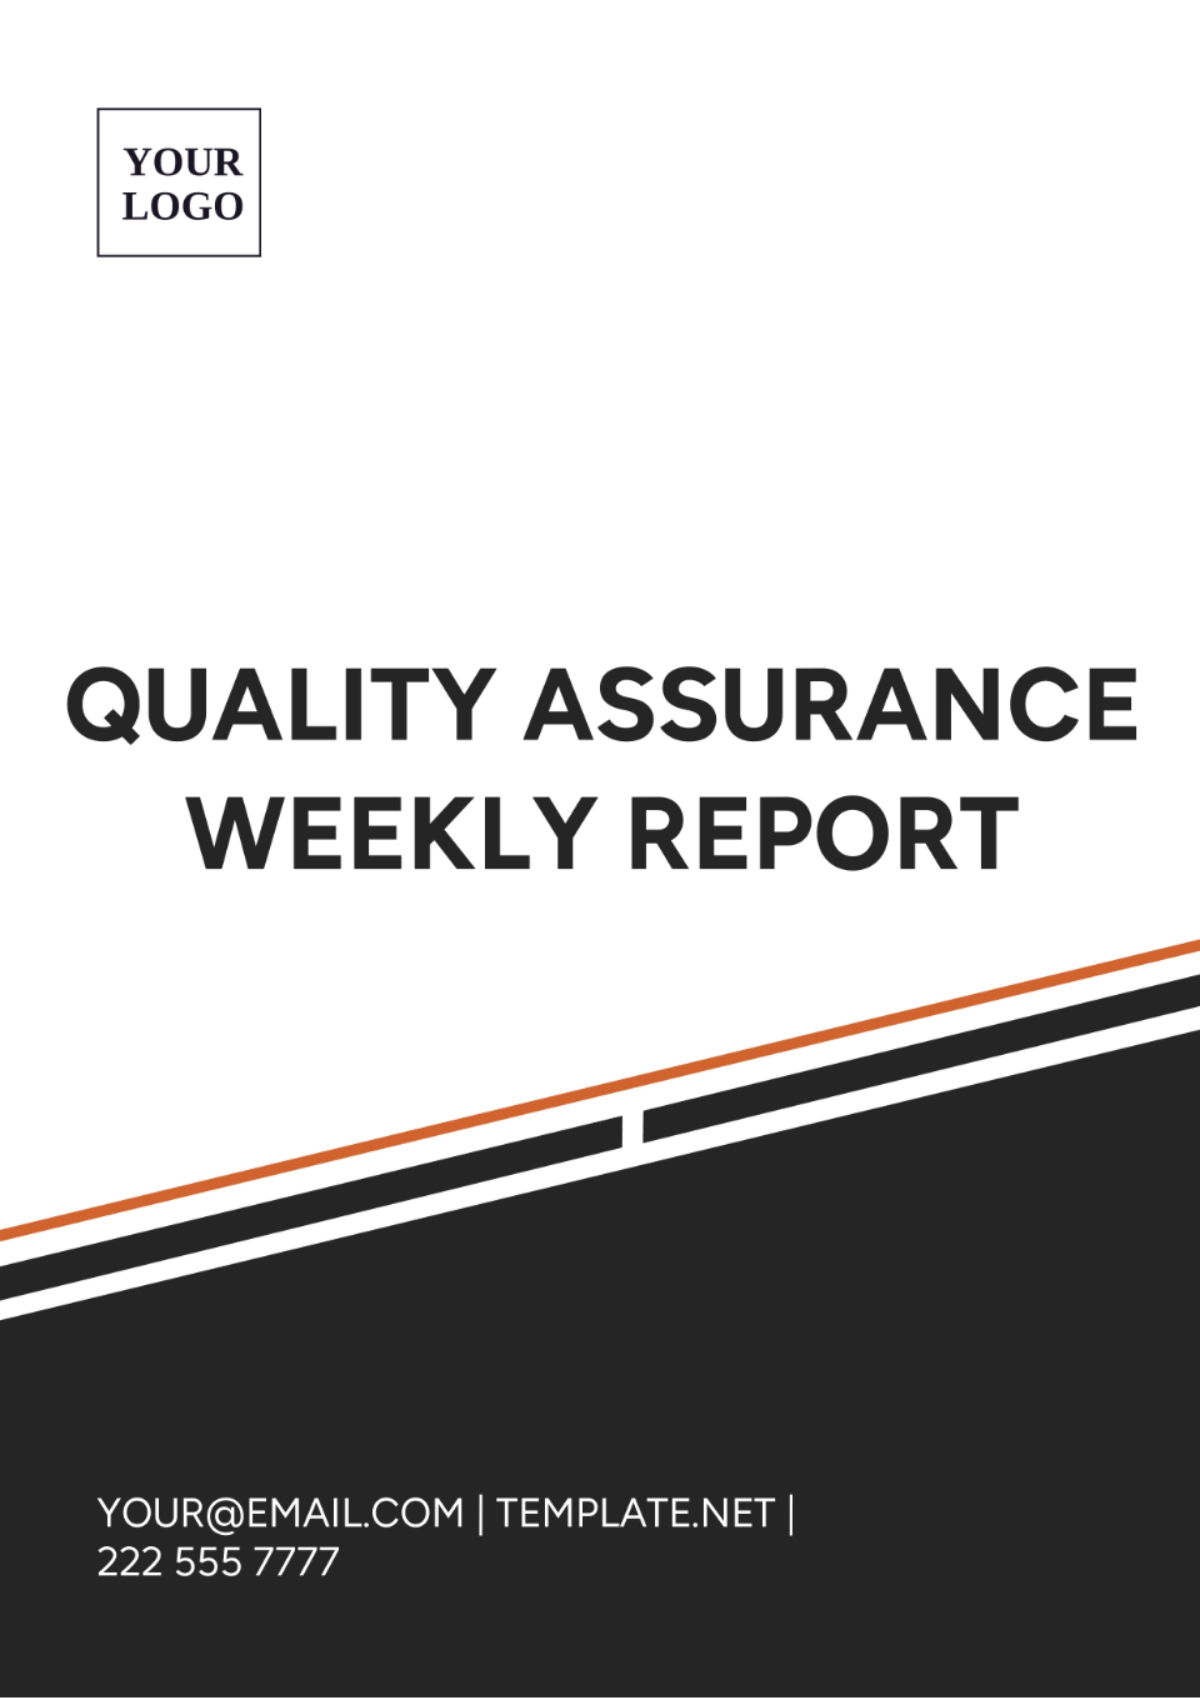 Quality Assurance Weekly Report Template